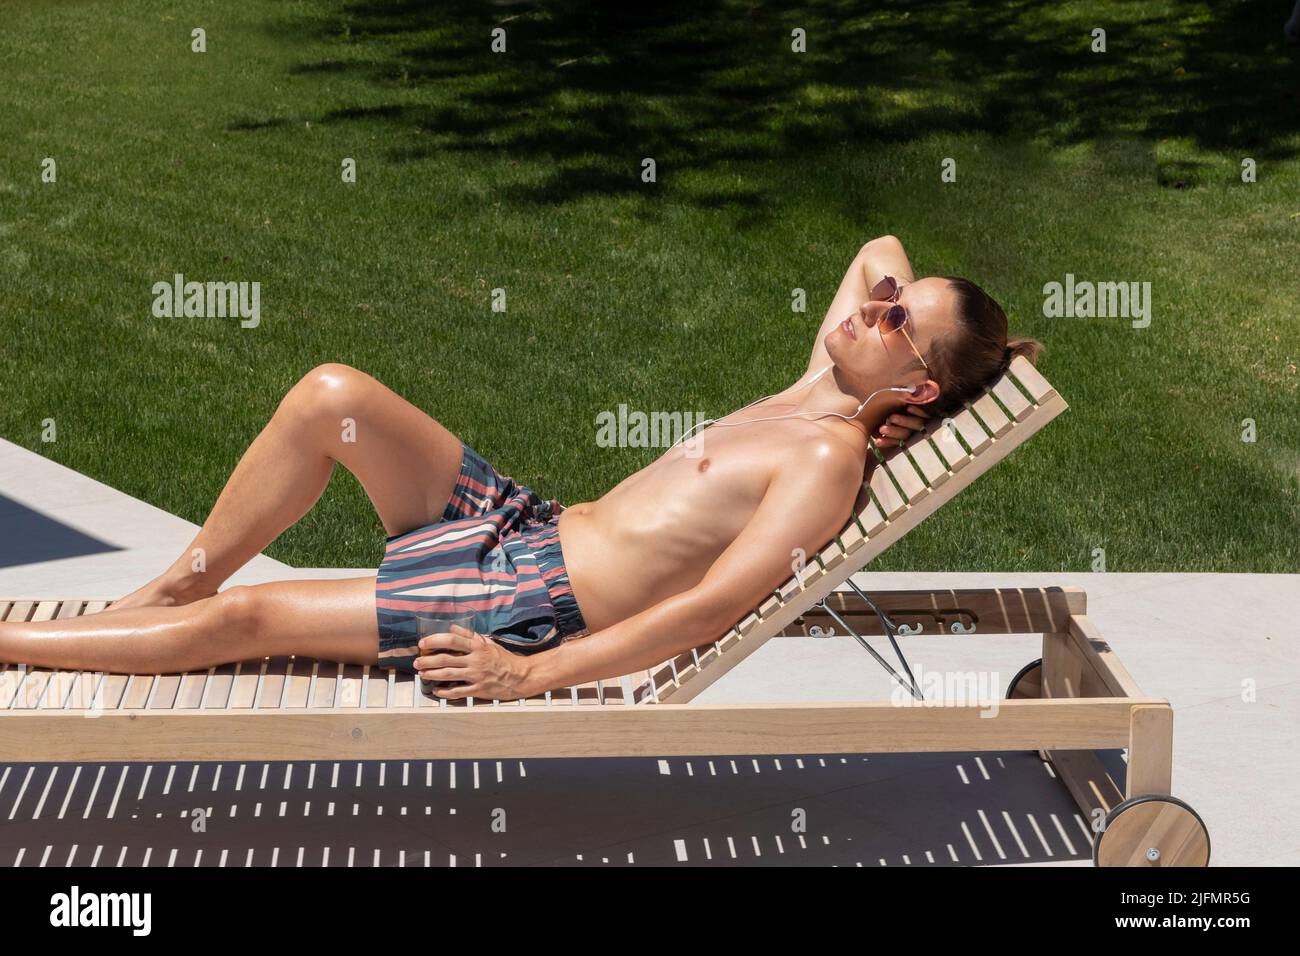 Young man on sunglasses and swimsuit lying on a sun lounger sun bathing close to the garden grass in summer time Stock Photo